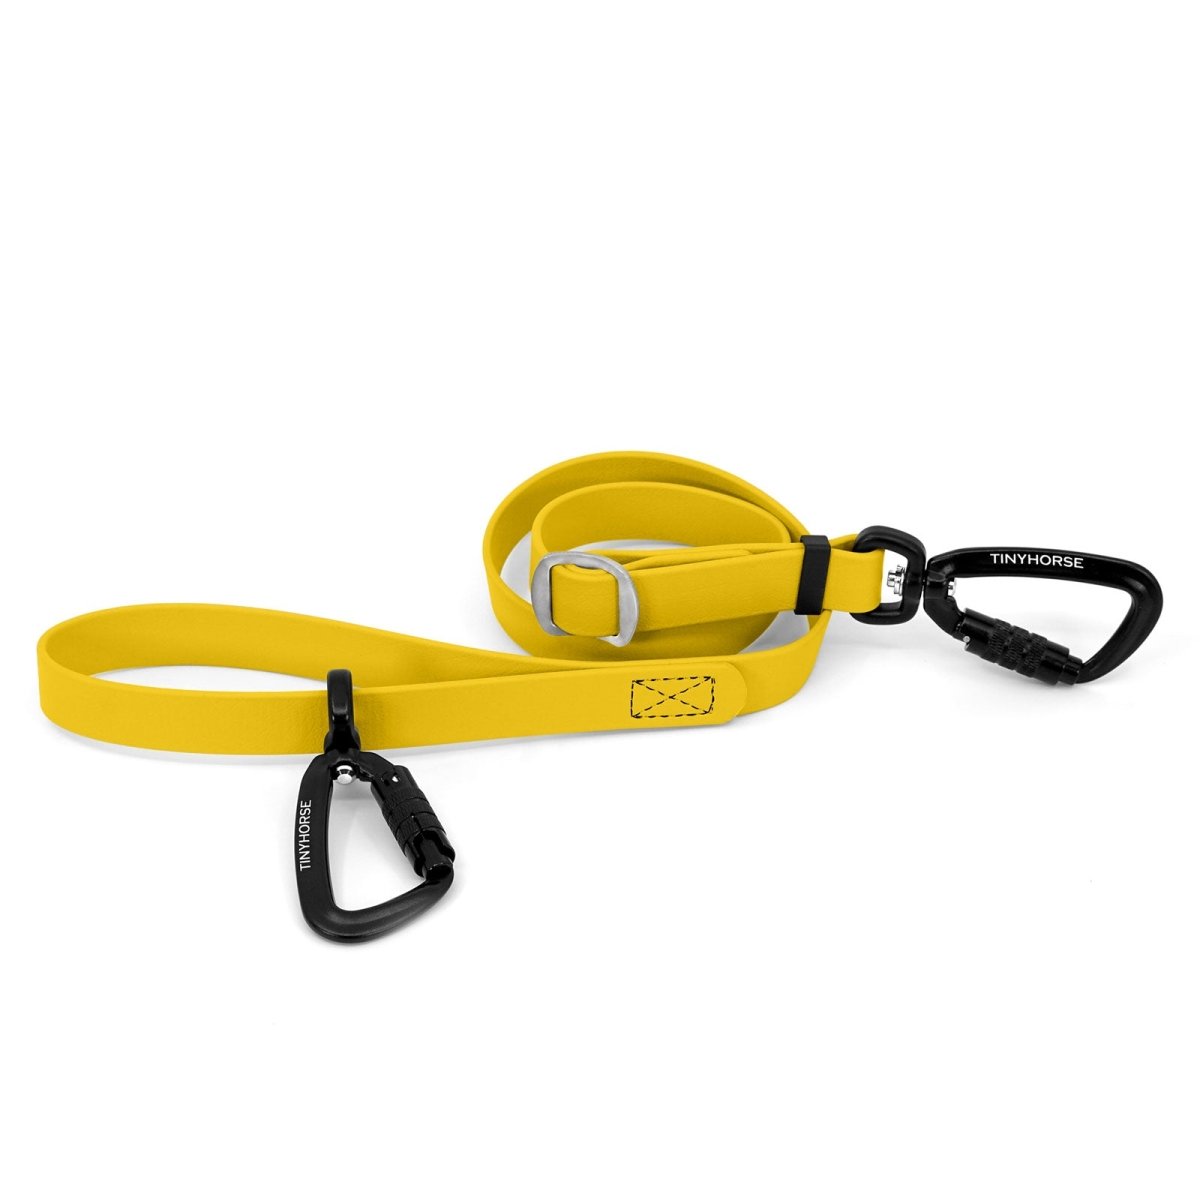 An adjustable yellow-coloured Lead-All Pro made of BioThane with 2 auto-locking carabiners